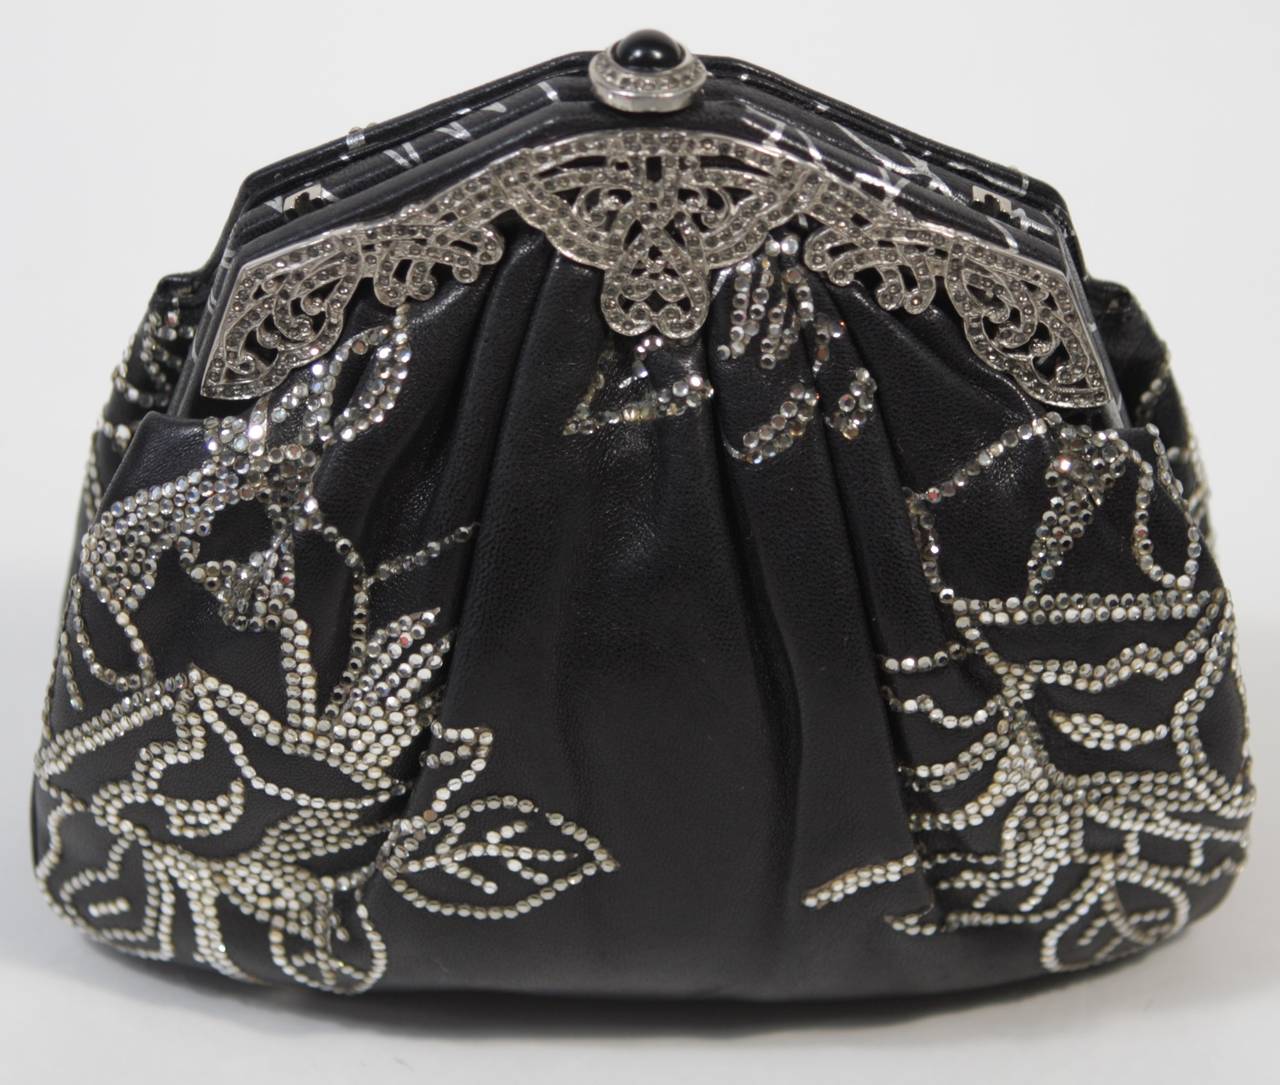 This vintage Judith Leiber is available for viewing at our Beverly Hills Boutique. We offer a large selection of evening gowns and luxury garments.

This handbag is composed of a black leather which features a rhinestone applique in a stunning